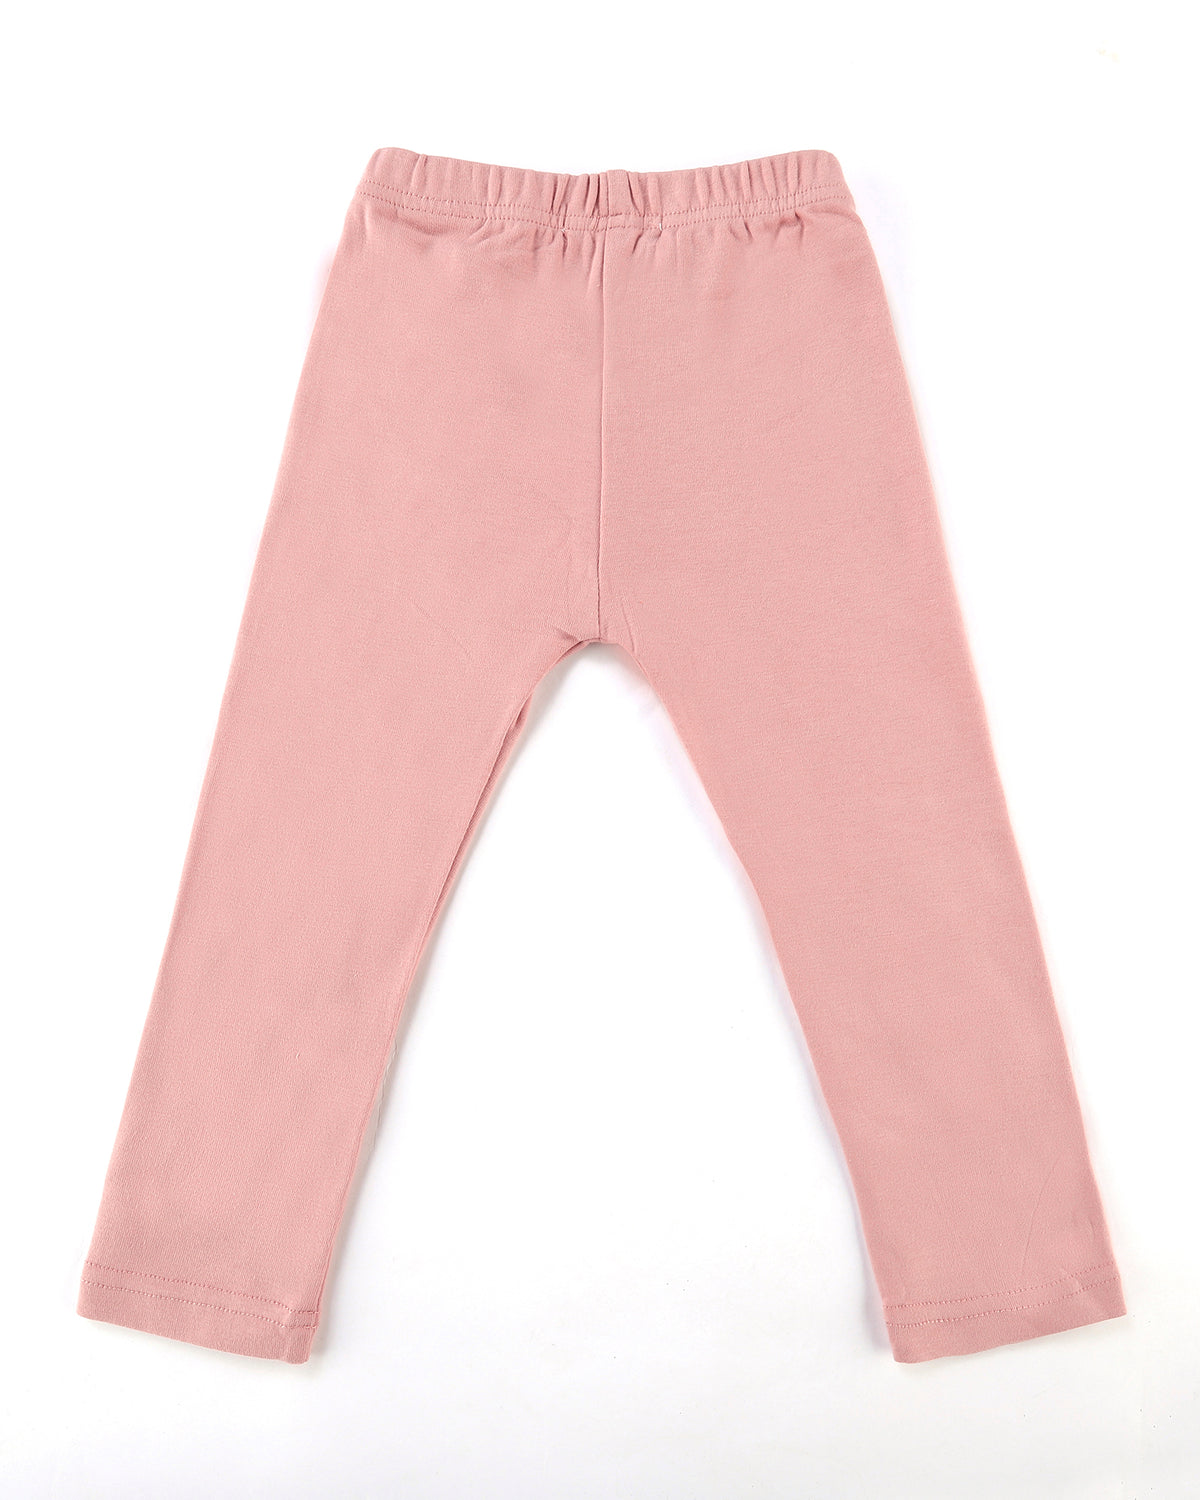 Here to stay Leggings In Pink Back